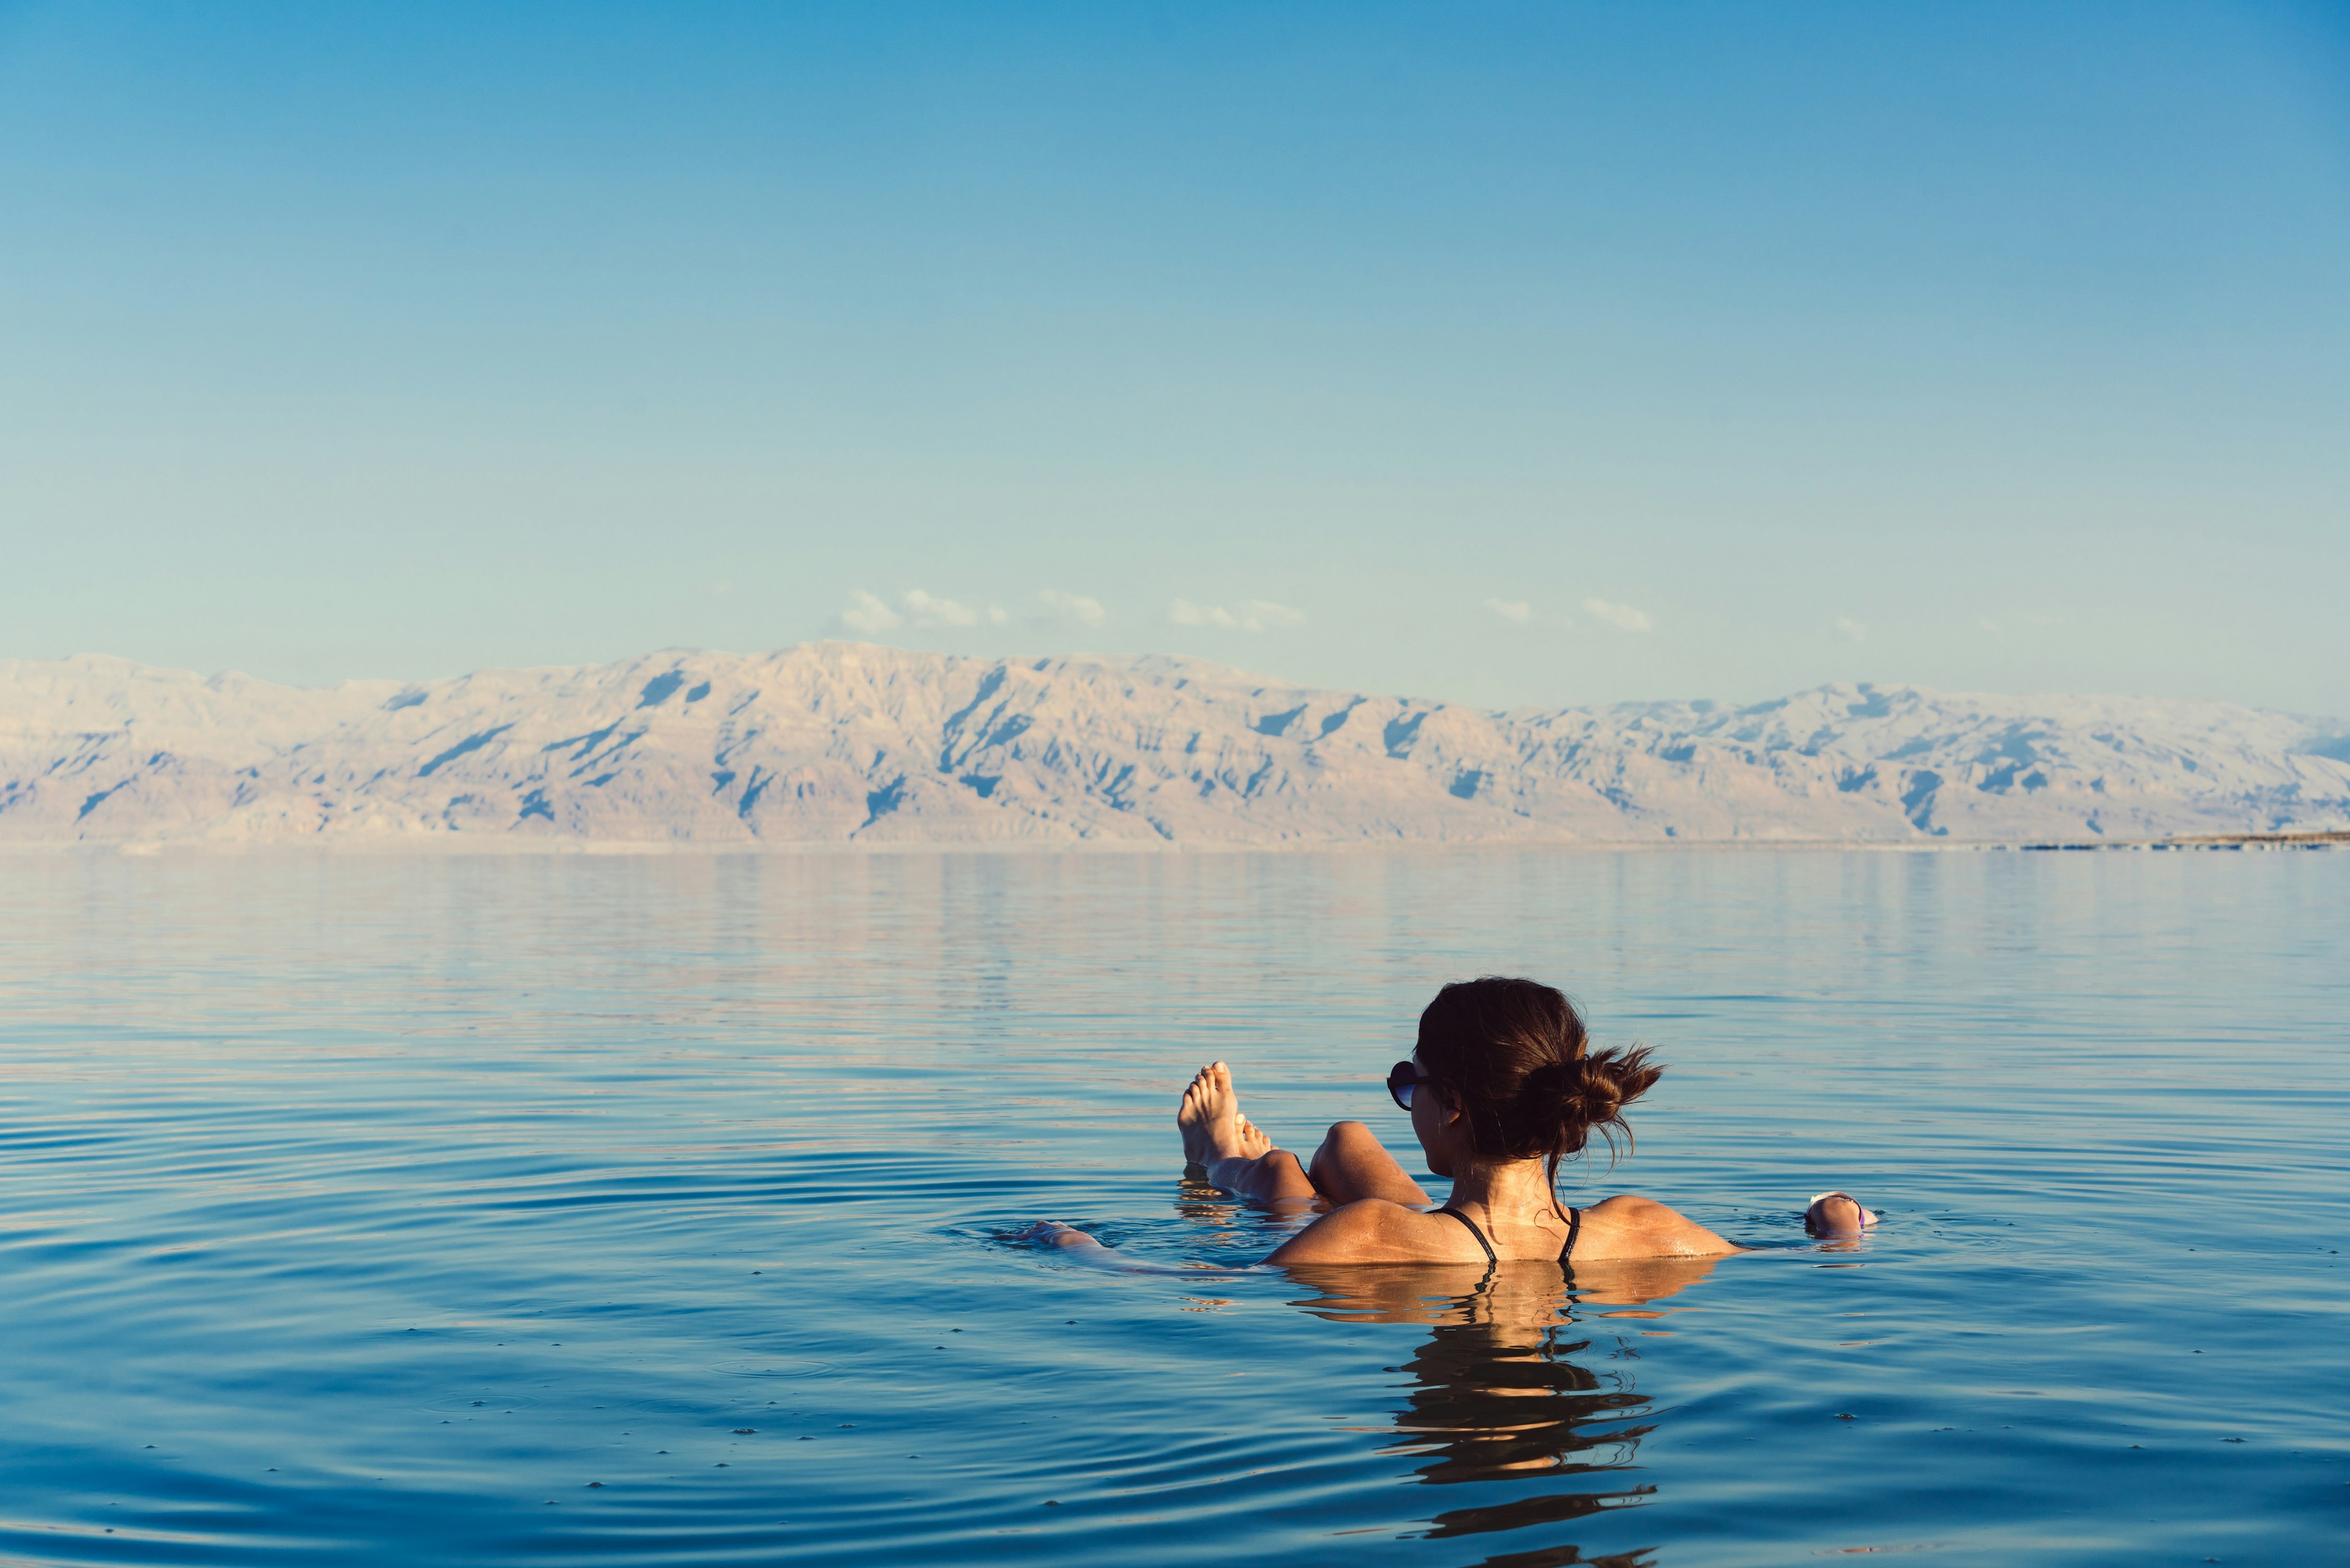 Girl relaxing and swimming in the water of the Dead Sea in Israel